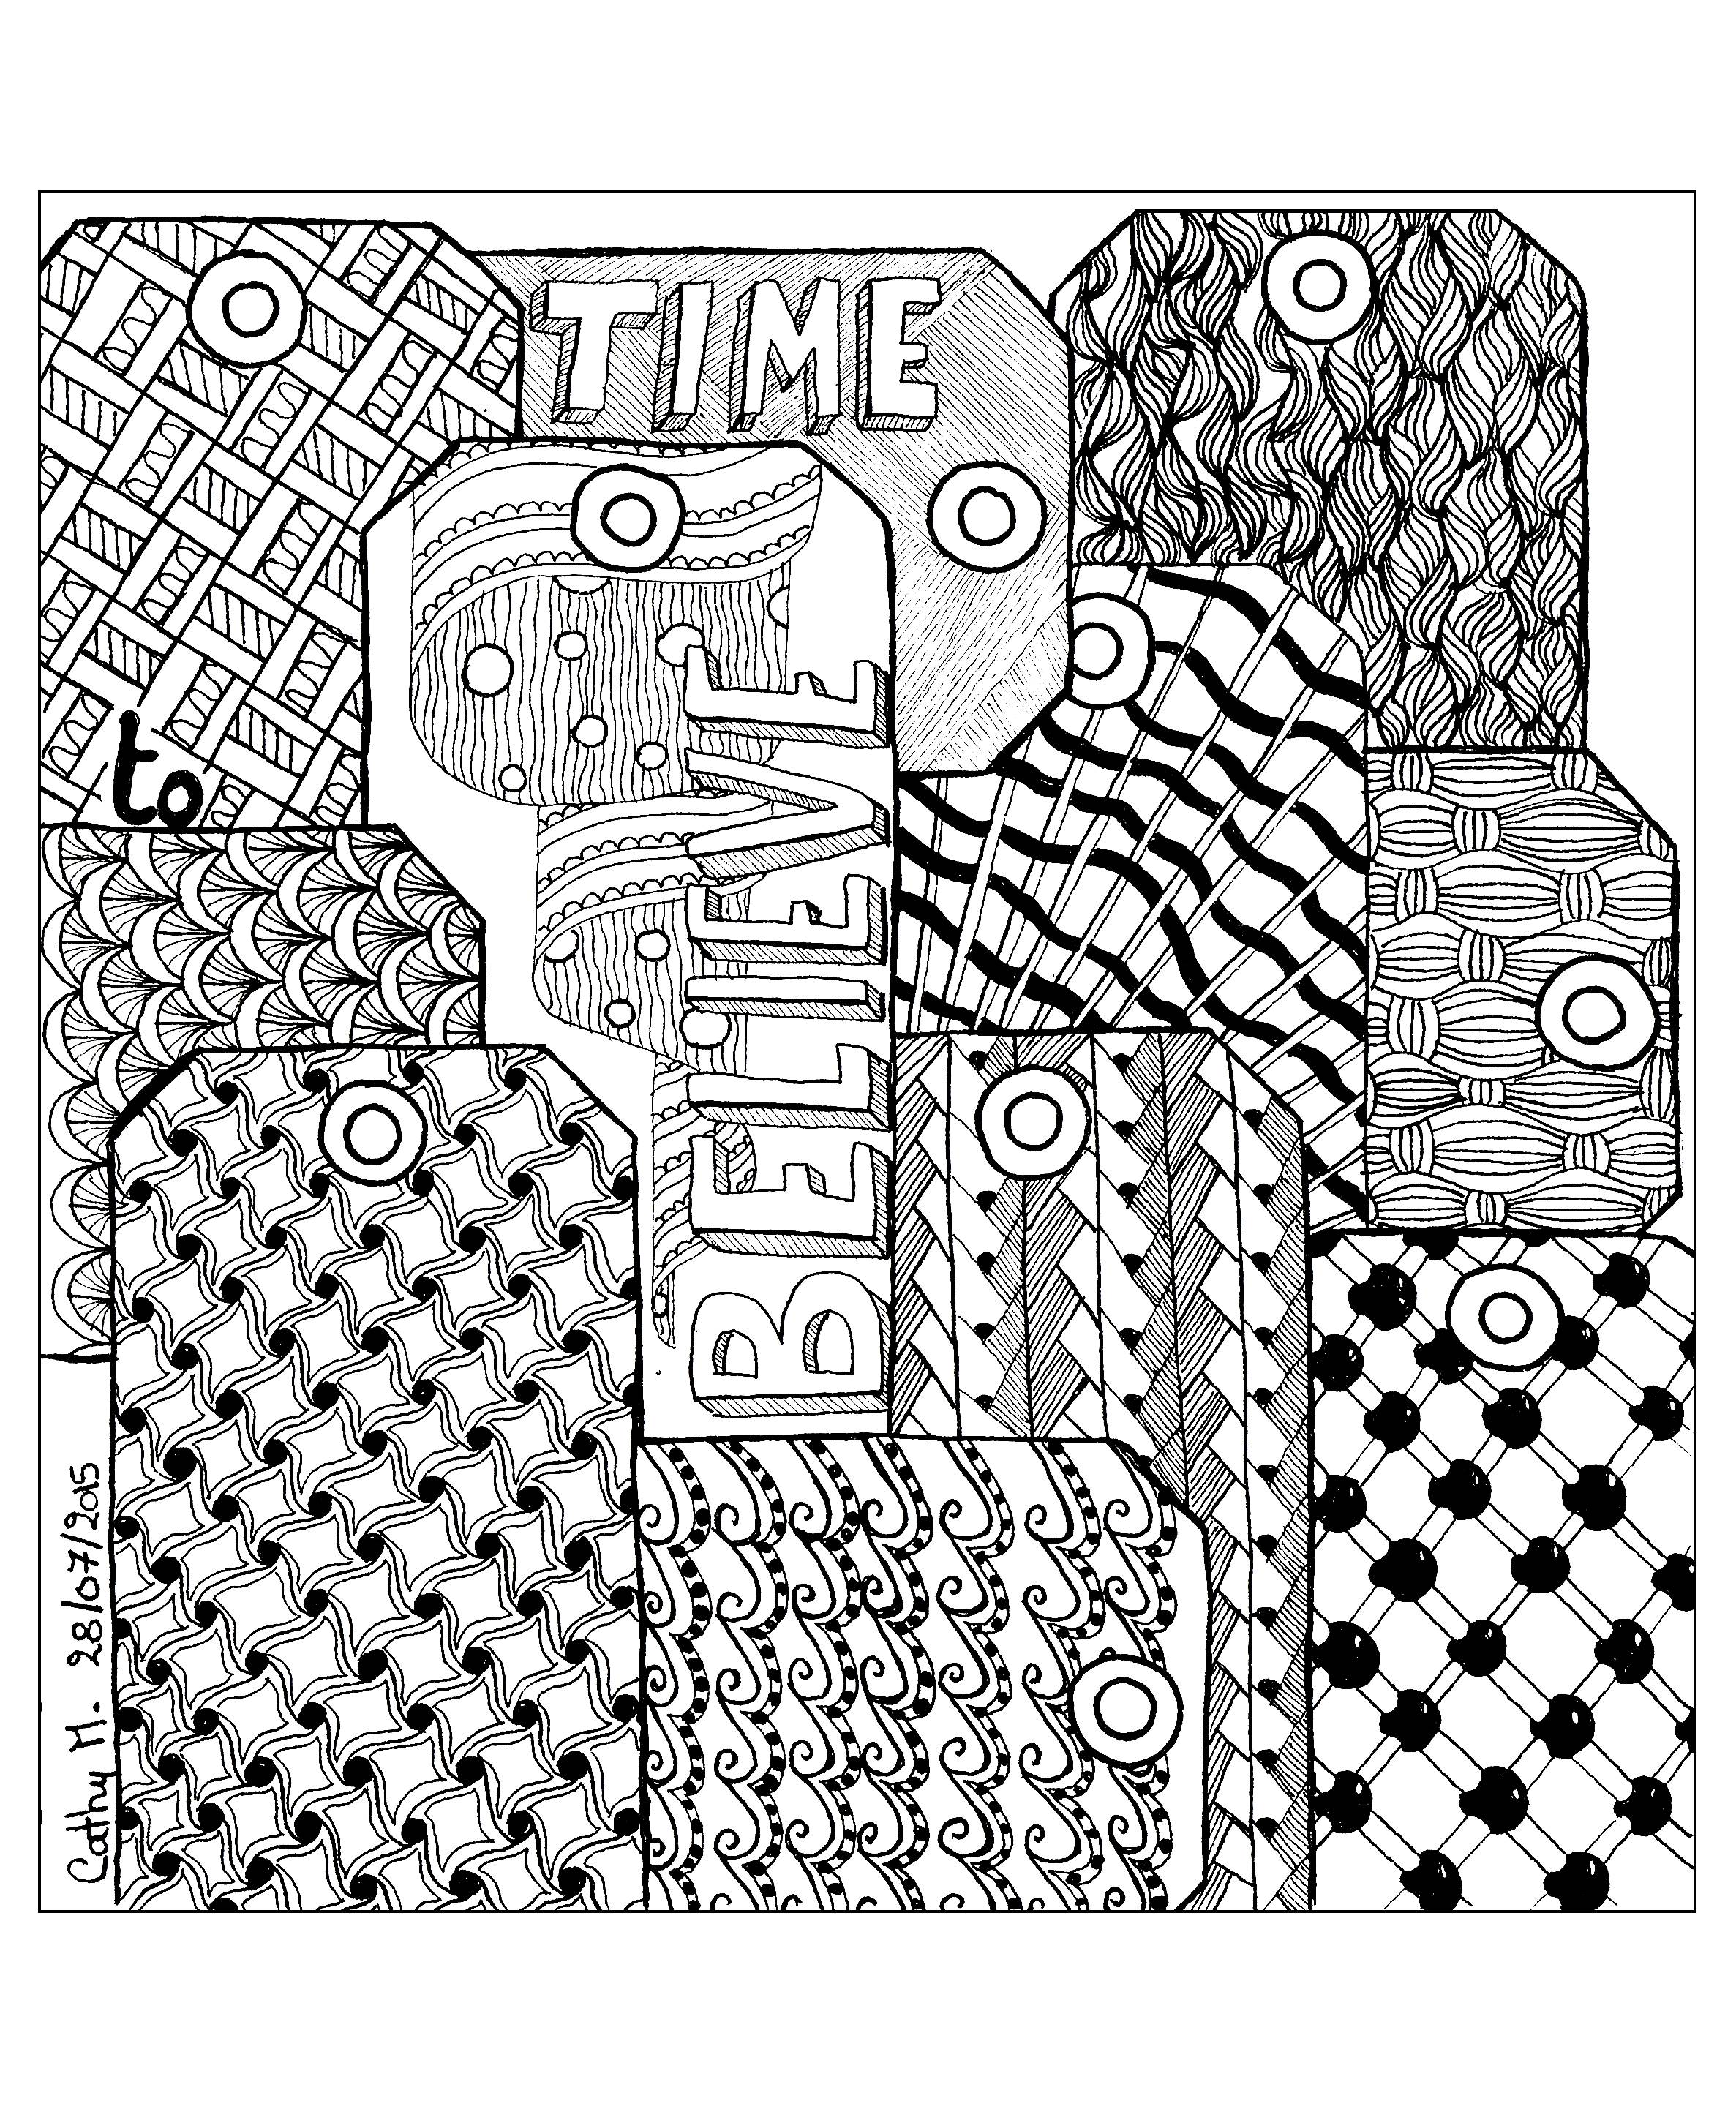 Original drawing Zentangle, to color, by Cathy M